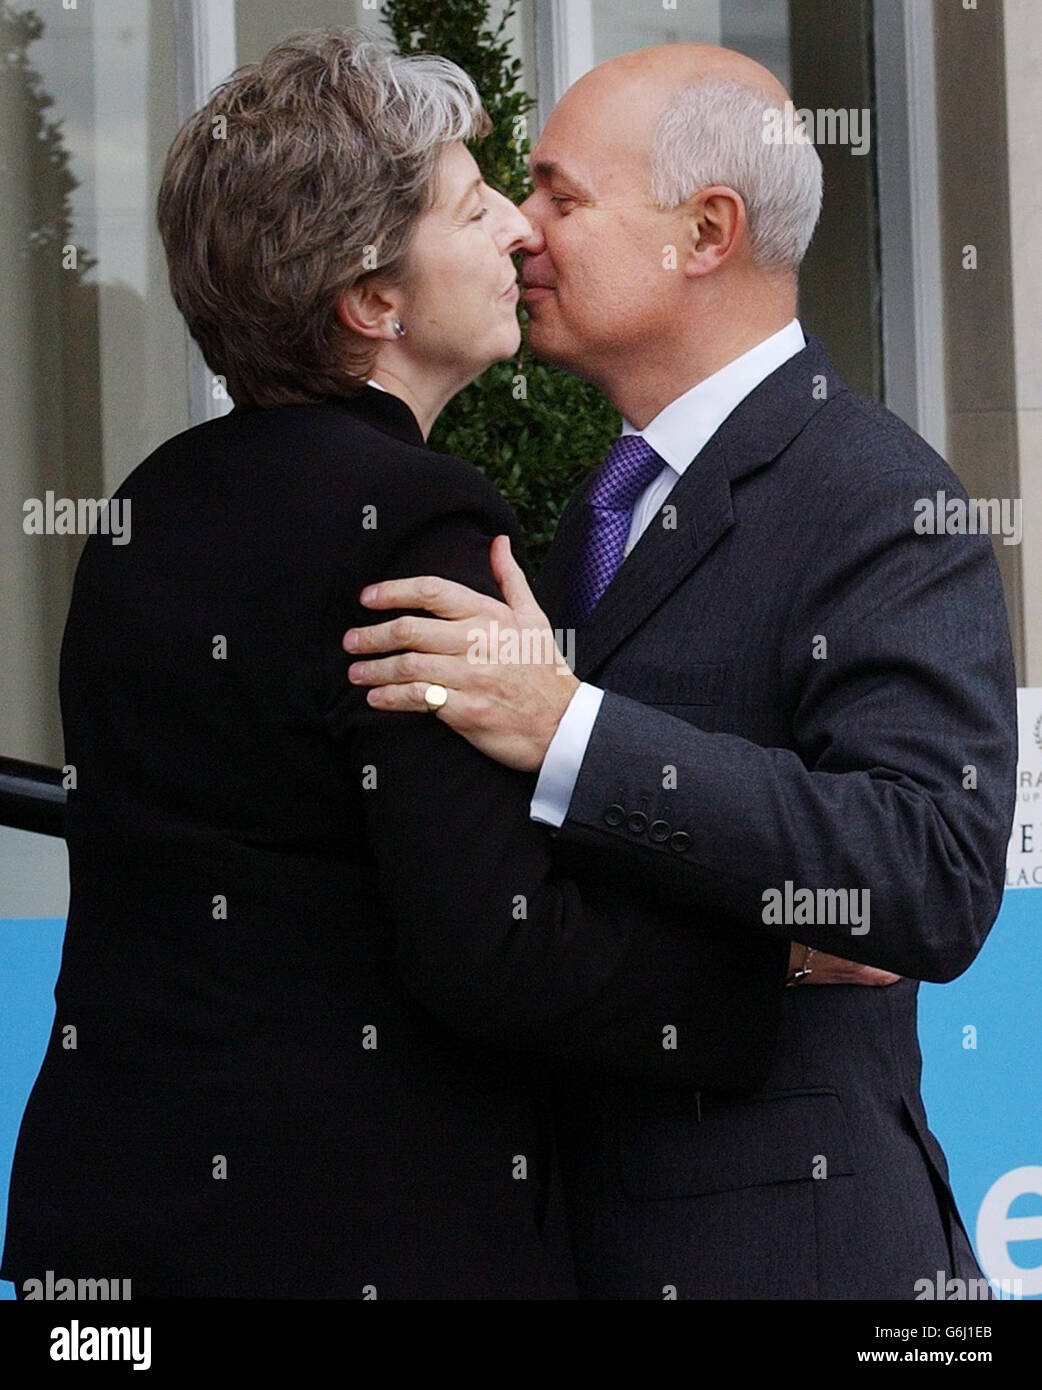 Conservative Party leader Iain Duncan Smith is greeted by party chairman Theresa May as he arrives at his hotel in Blackpool, on the eve of his party's annual conference. Tories pledged to increase the basic state pension in line with average earnings if they were returned to power, in a bid to grab the vital "grey vote" in the upcoming general election. The conference is also expected to see the announcement of a scheme for US-style elected sheriffs to run local police units, and the publication of a document setting out the basis of the party's manifesto for the next General Election. Stock Photo